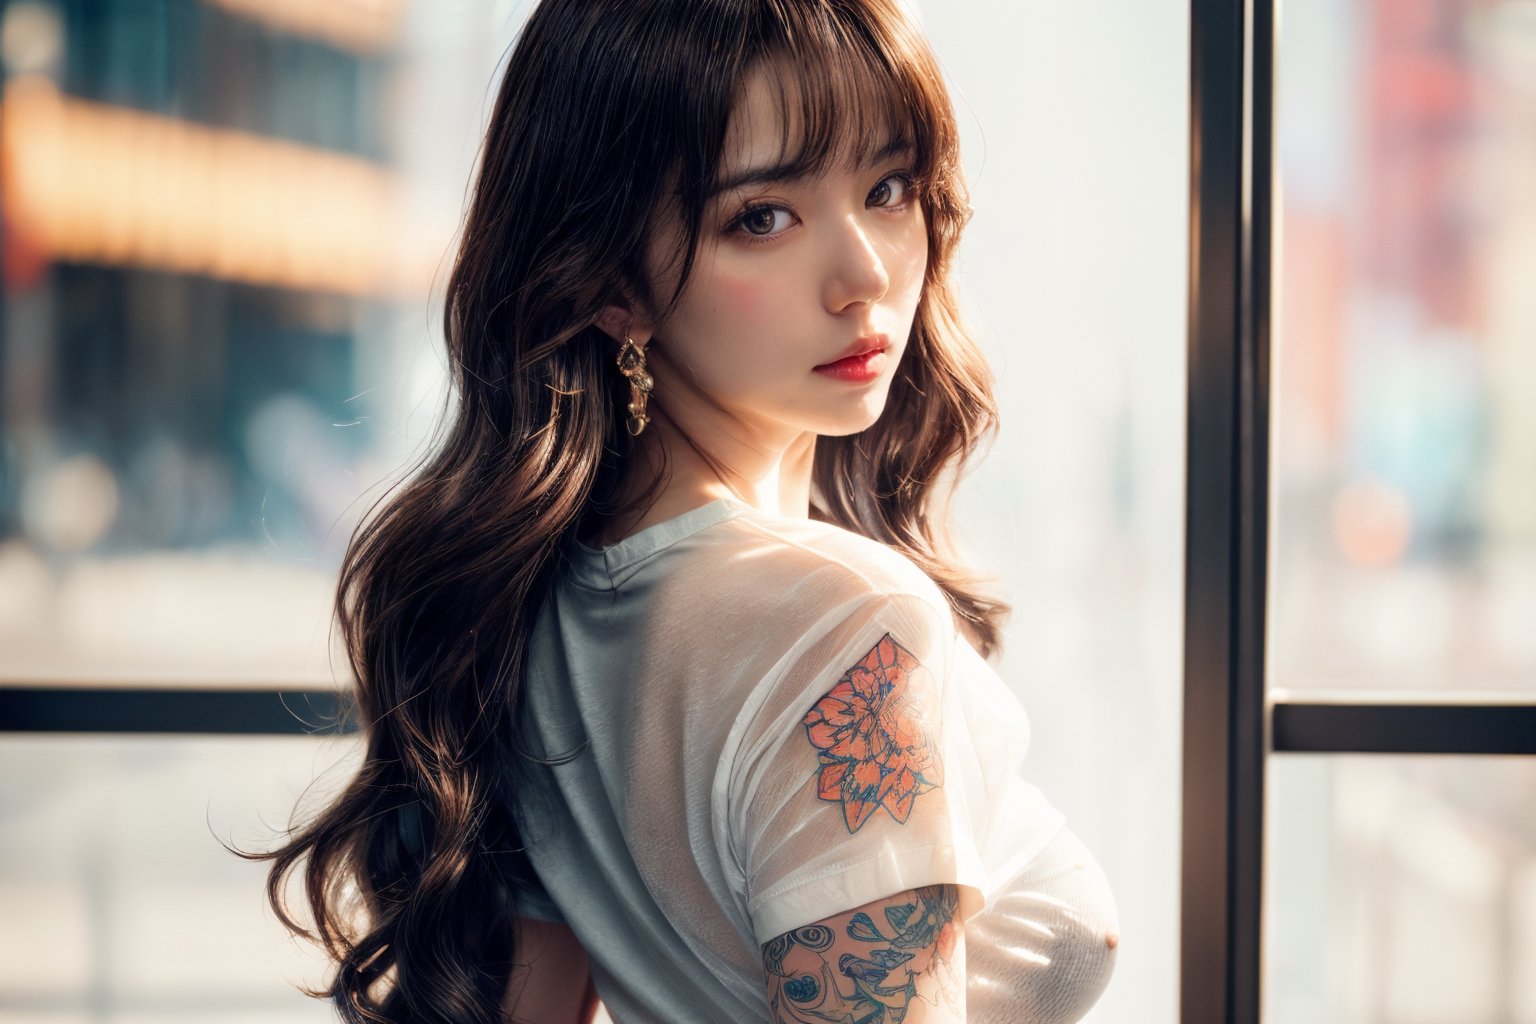 amazing tattoo design, (((Hyper-detailed Hyper-Realistic))), illustration, hand-drawn, bold linework, (Humanoid:1.5) (Human:1.5) anthro illustration, cel shaded, 4k, fine details, masterpiece, sharp focus, depth of field, 8k photo, HDR, professional lighting, taken with Canon EOS R5, 75mm lens, absolute masterpiece, cute moe anime character portrait, adorable, featured on pixiv, kawaii moé masterpiece, cuteness overload, very detailed, sooooo adorable!!!, absolute masterpiece, neon color grading, hyper-realistic, high-quality, super-hyper-photorealistic, ultra-high-quality, realistic photo quality , cinematic shot, dynamic lighting, 75mm, Technicolor, Panavision, cinemascope, sharp focus, fine details, 8k, HDR, realism, realistic, key visual, film still, superb cinematic color grading, depth of field, A ((stunningly beautiful)), ((slender and toned)) ((full-length)) woman with long, wavy ((flowing)) dark brown hair that cascades down her back, framing her oval face perfectly. Her piercing emerald eyes seem to sparkle with life as they gaze directly at the viewer, exuding confidence and grace. She is clad in a crisp, (see-through white short t-shirt:1.5) that hugs her curves in all the right places, erect nipples, accentuating her ((high cheekbones)) and sculpted collarbones. The see-through t-shirt is revealing a hint of her smooth, ((creamy ((white skin)). The model's posture is poised and elegant, as if she's about to step onto a runway or into a boardroom, ready to take on whatever challenge comes her way. The background is a neutral, soft-focus color that allows the subject to stand out even more, emphasizing her striking features and alluring presence. tits 1.2, breathtaking tattoo design, incredible tattoo design